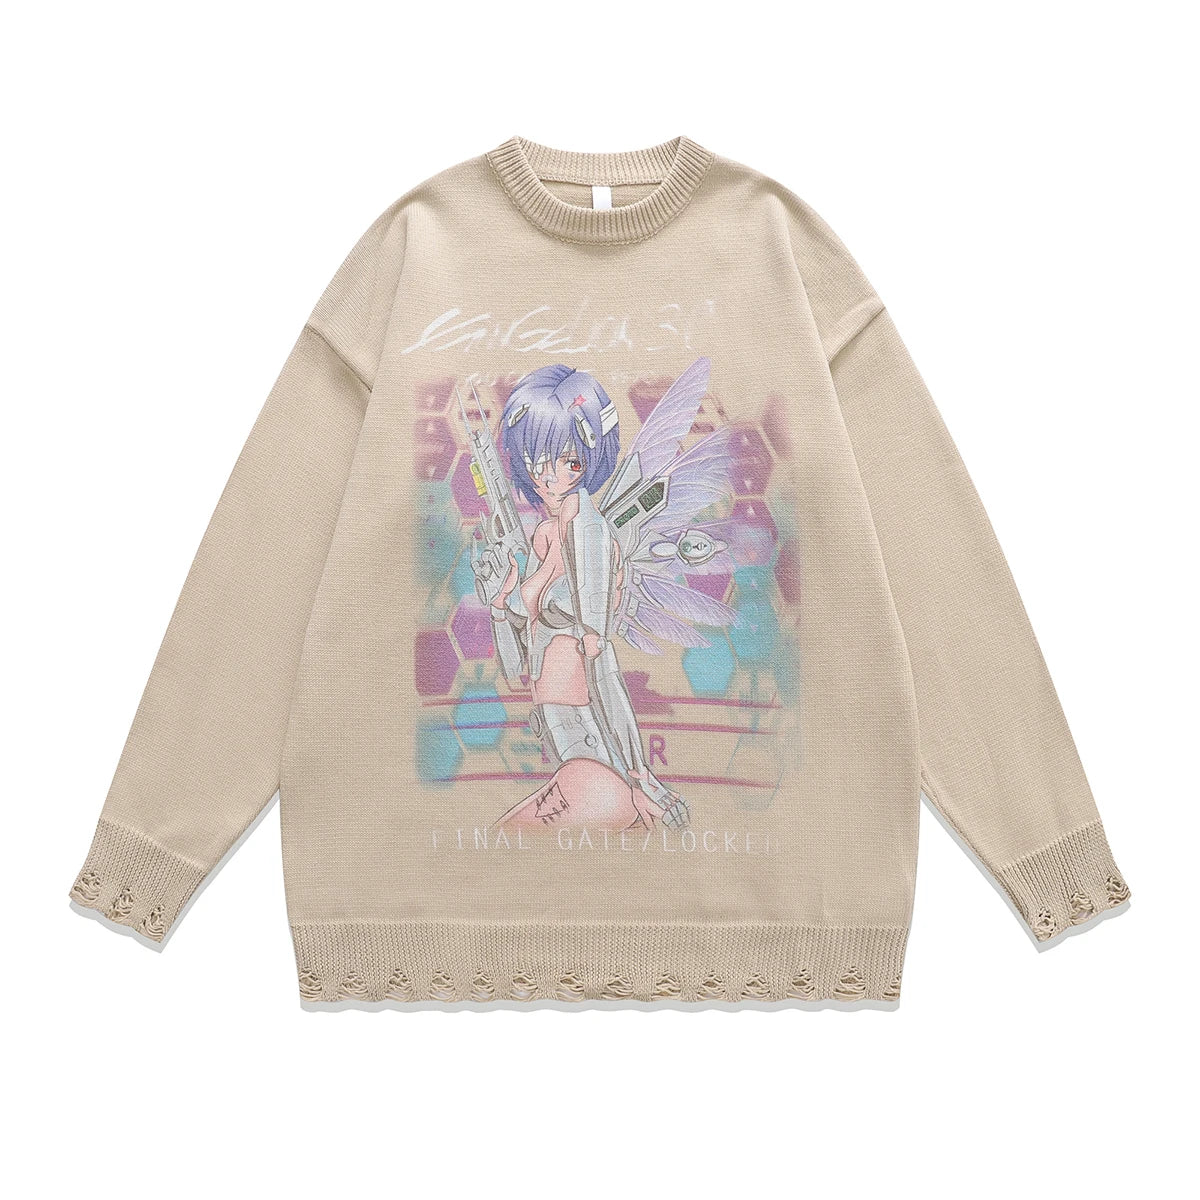 Anime New Jeans Sweater Apricot 2